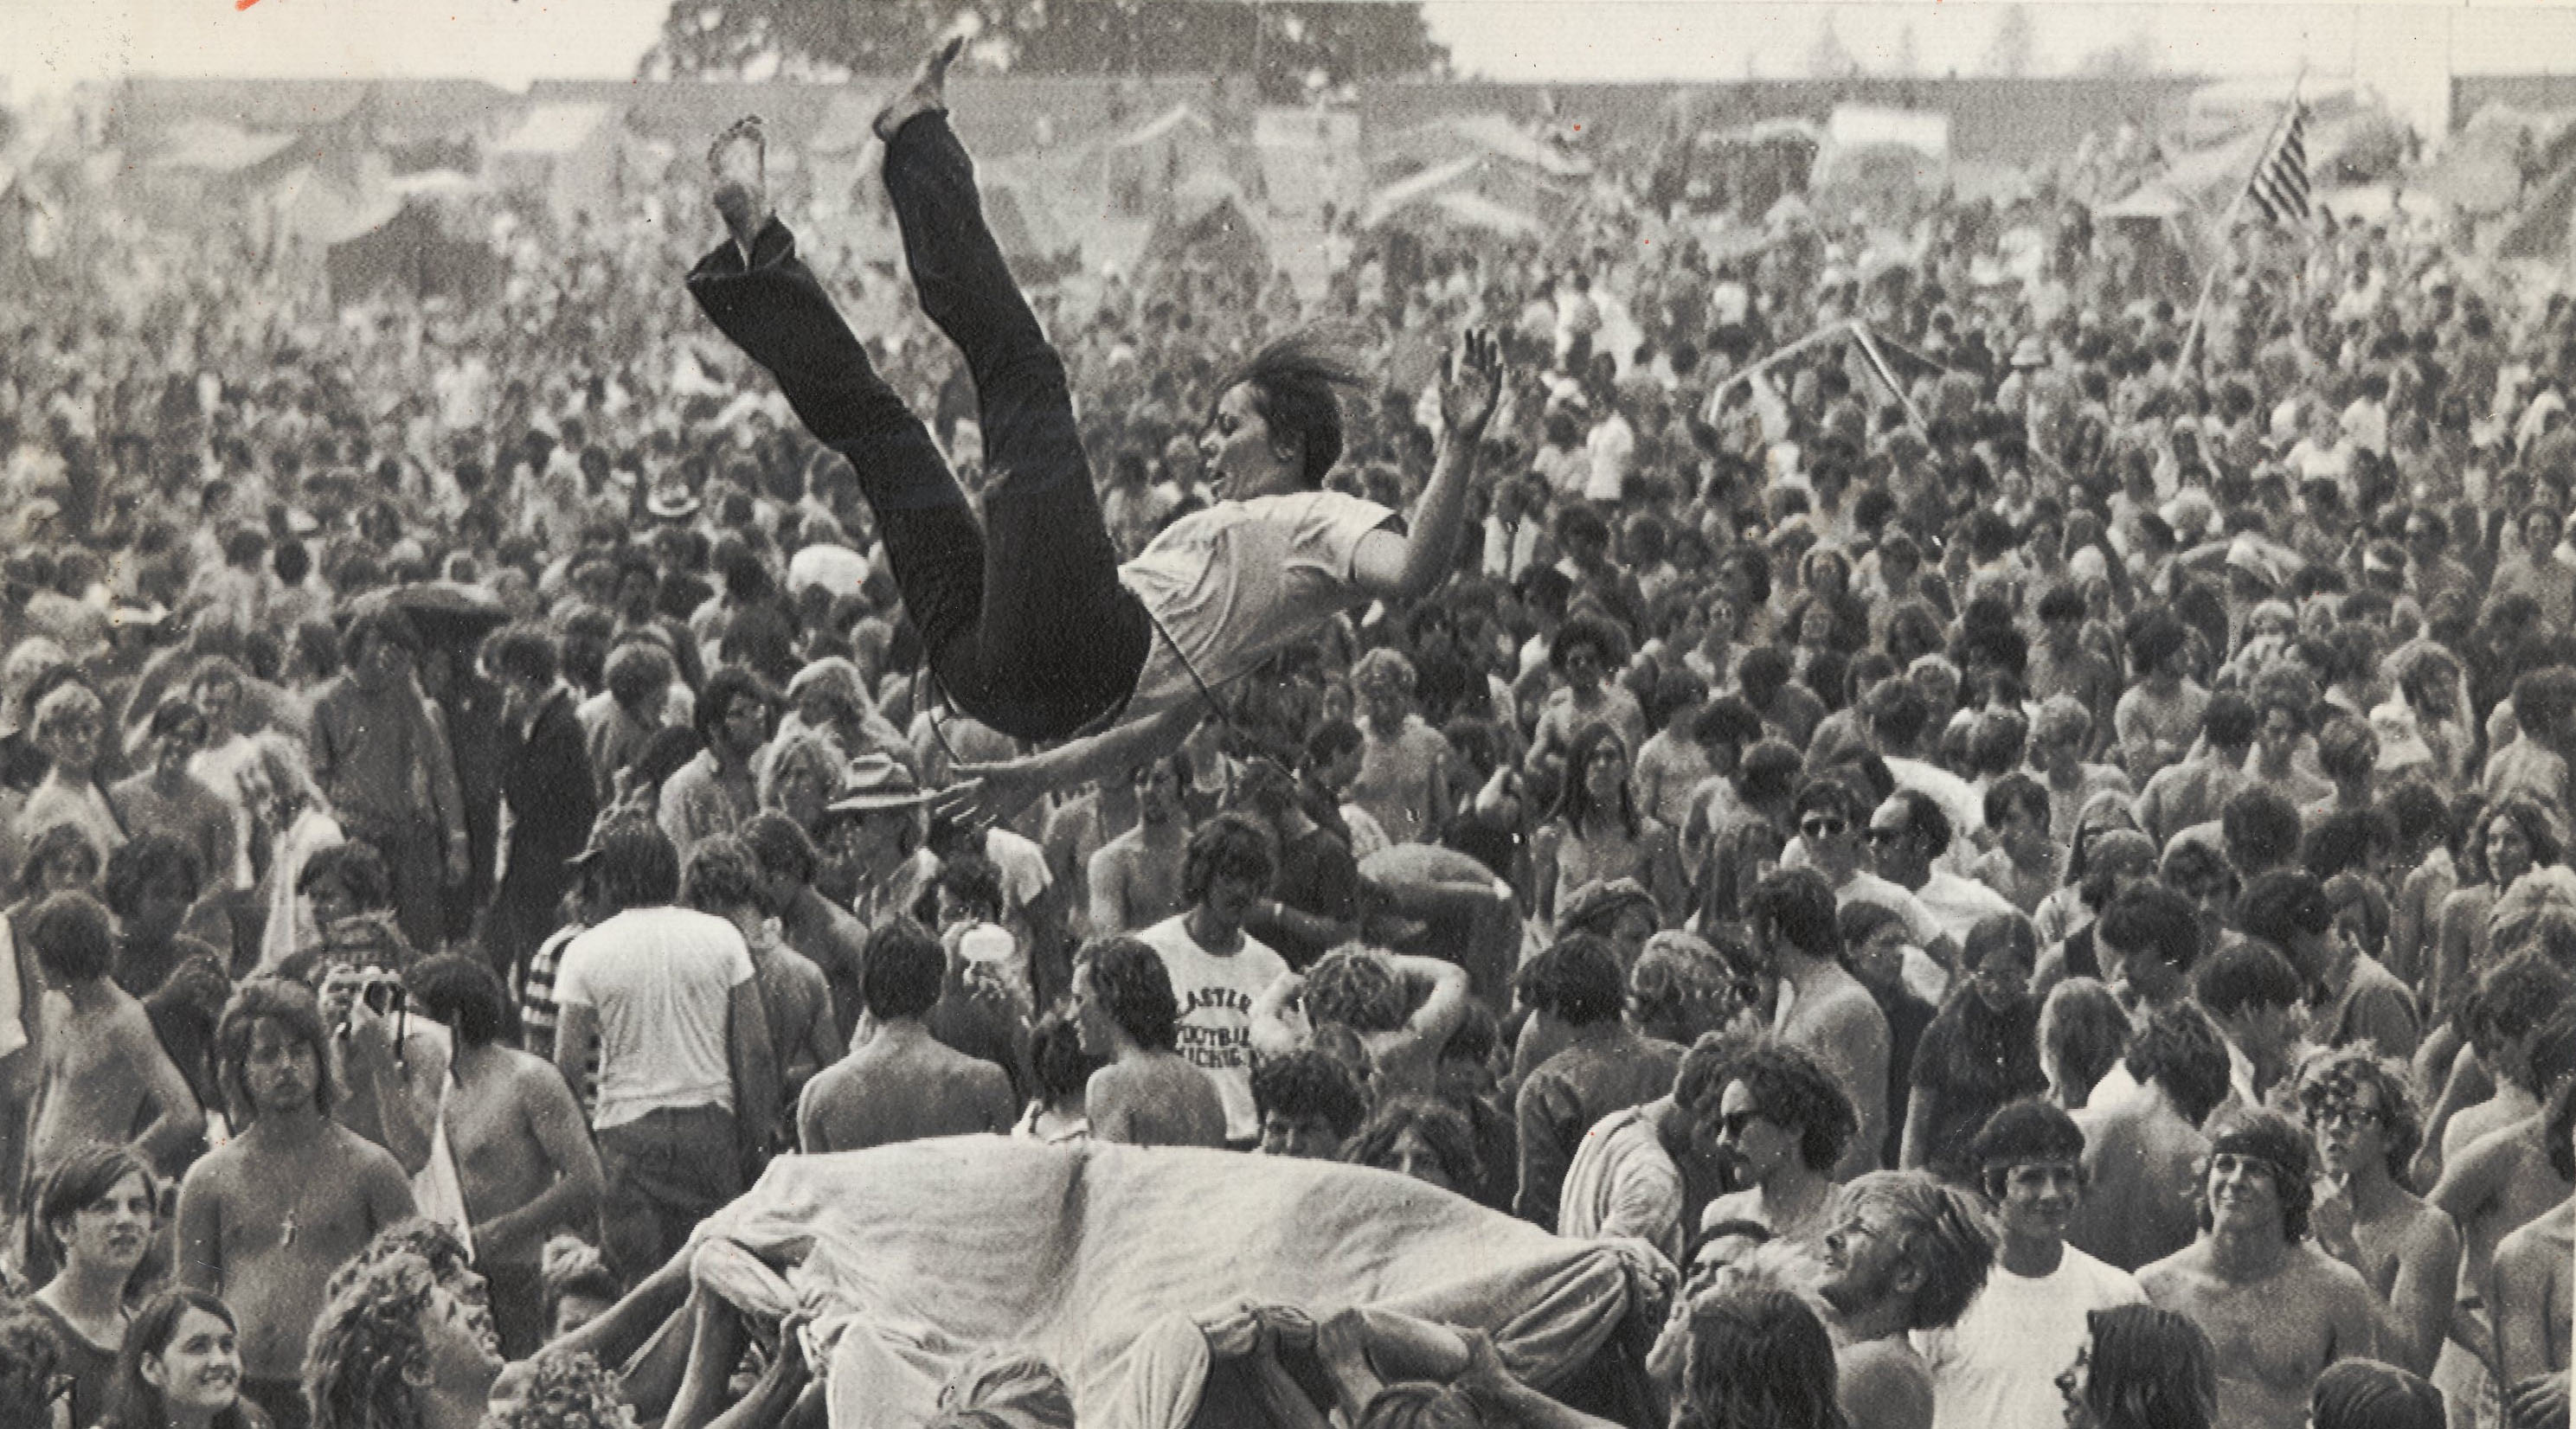 woodstock wallpaper,crowd,people,event,audience,black and white